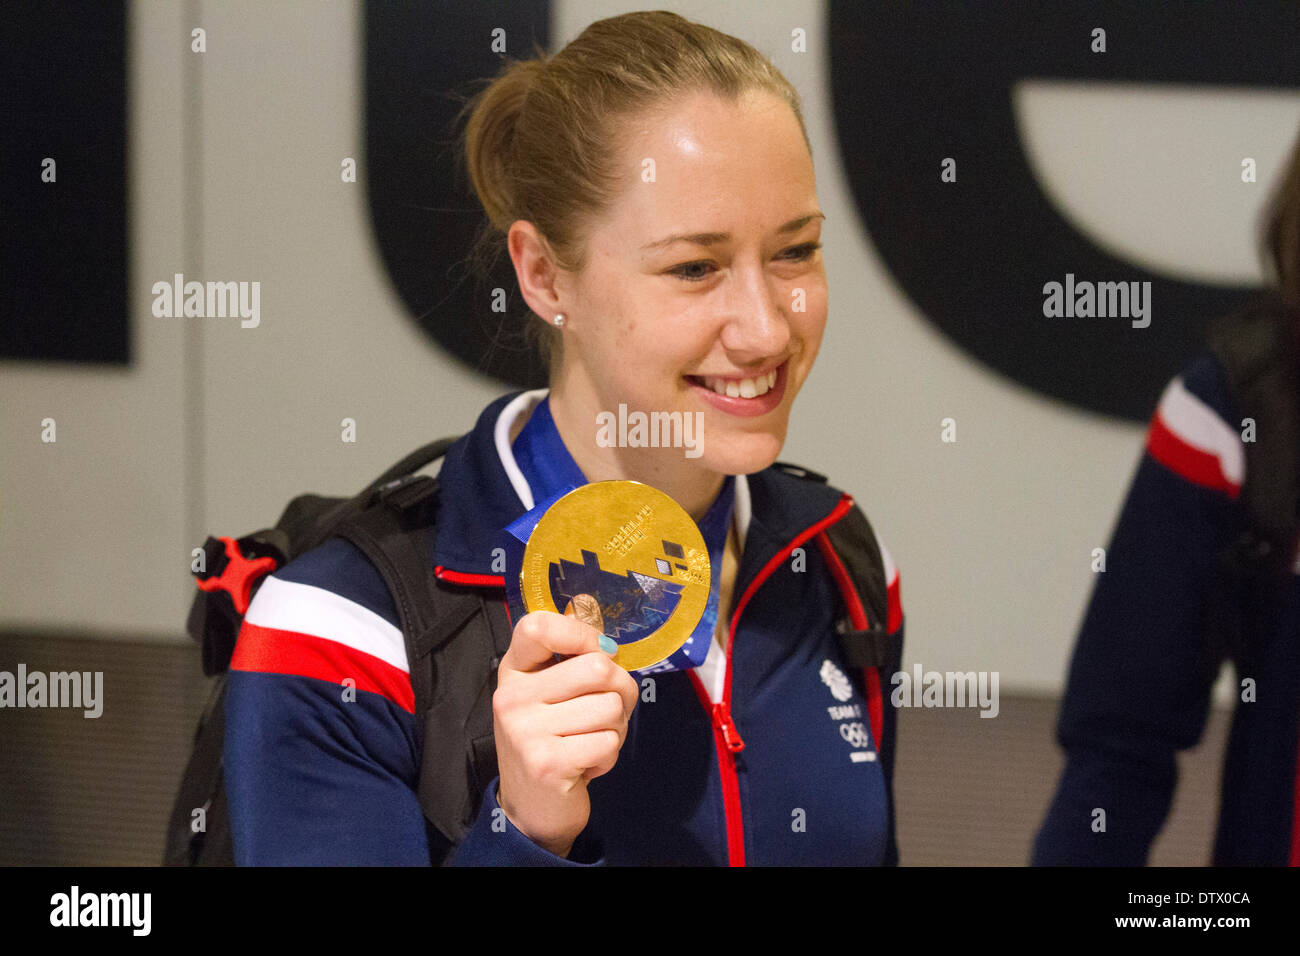 Heathrow London, UK. 24th February 2014. Liz Yarnold winner of the women's  skeleton event arrives at Heathrow from the 2014 winter olympics in Sochi wearing her gold medal Credit:  amer ghazzal/Alamy Live News Stock Photo